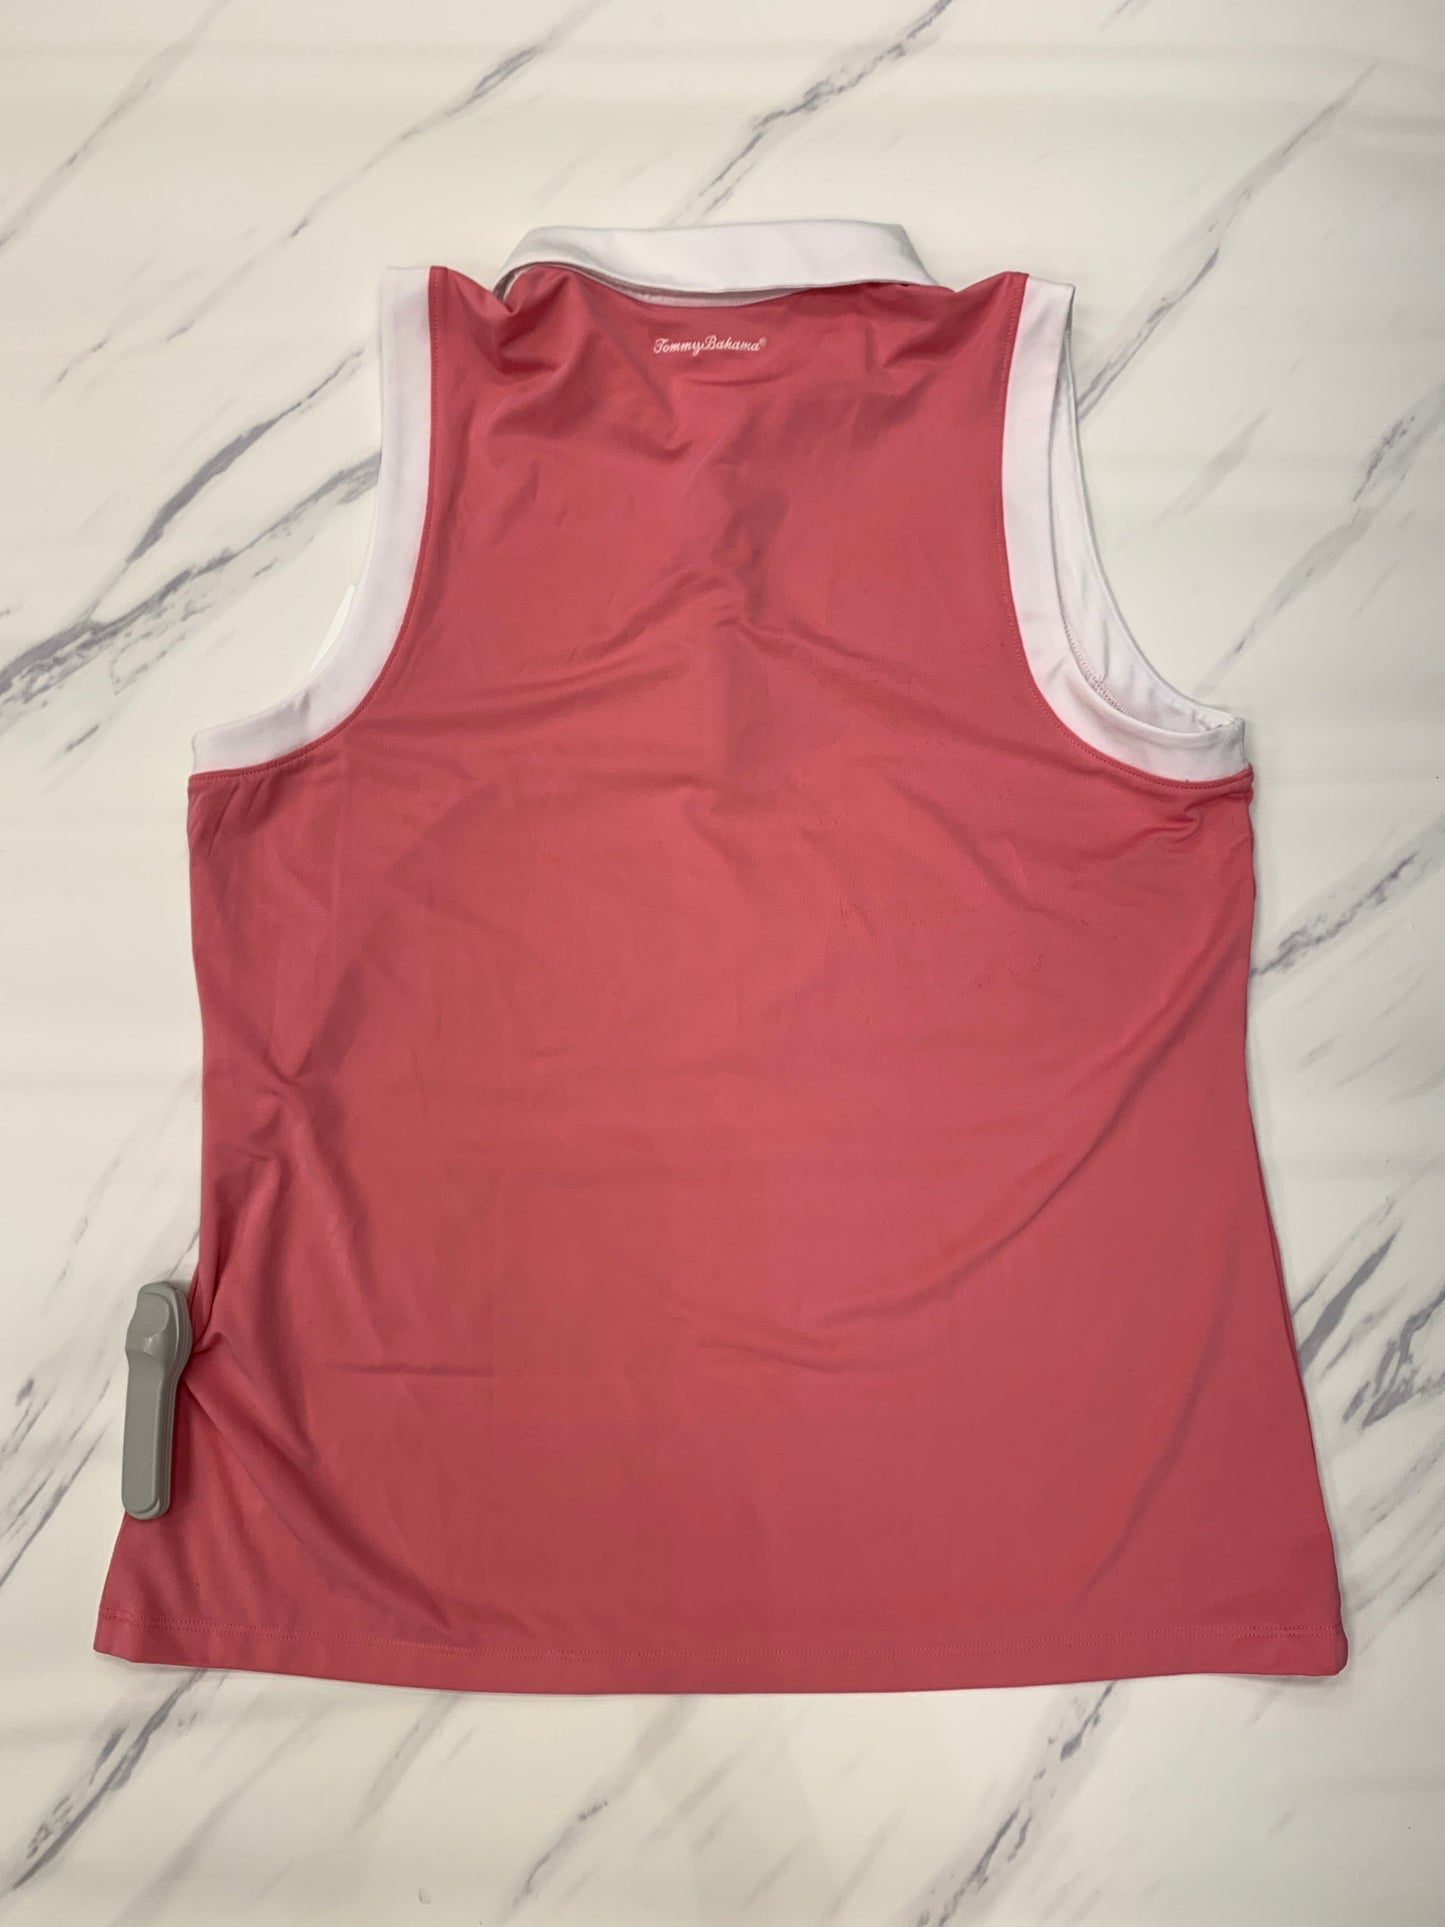 Athletic Tank Top By Tommy Bahama  Size: Xl